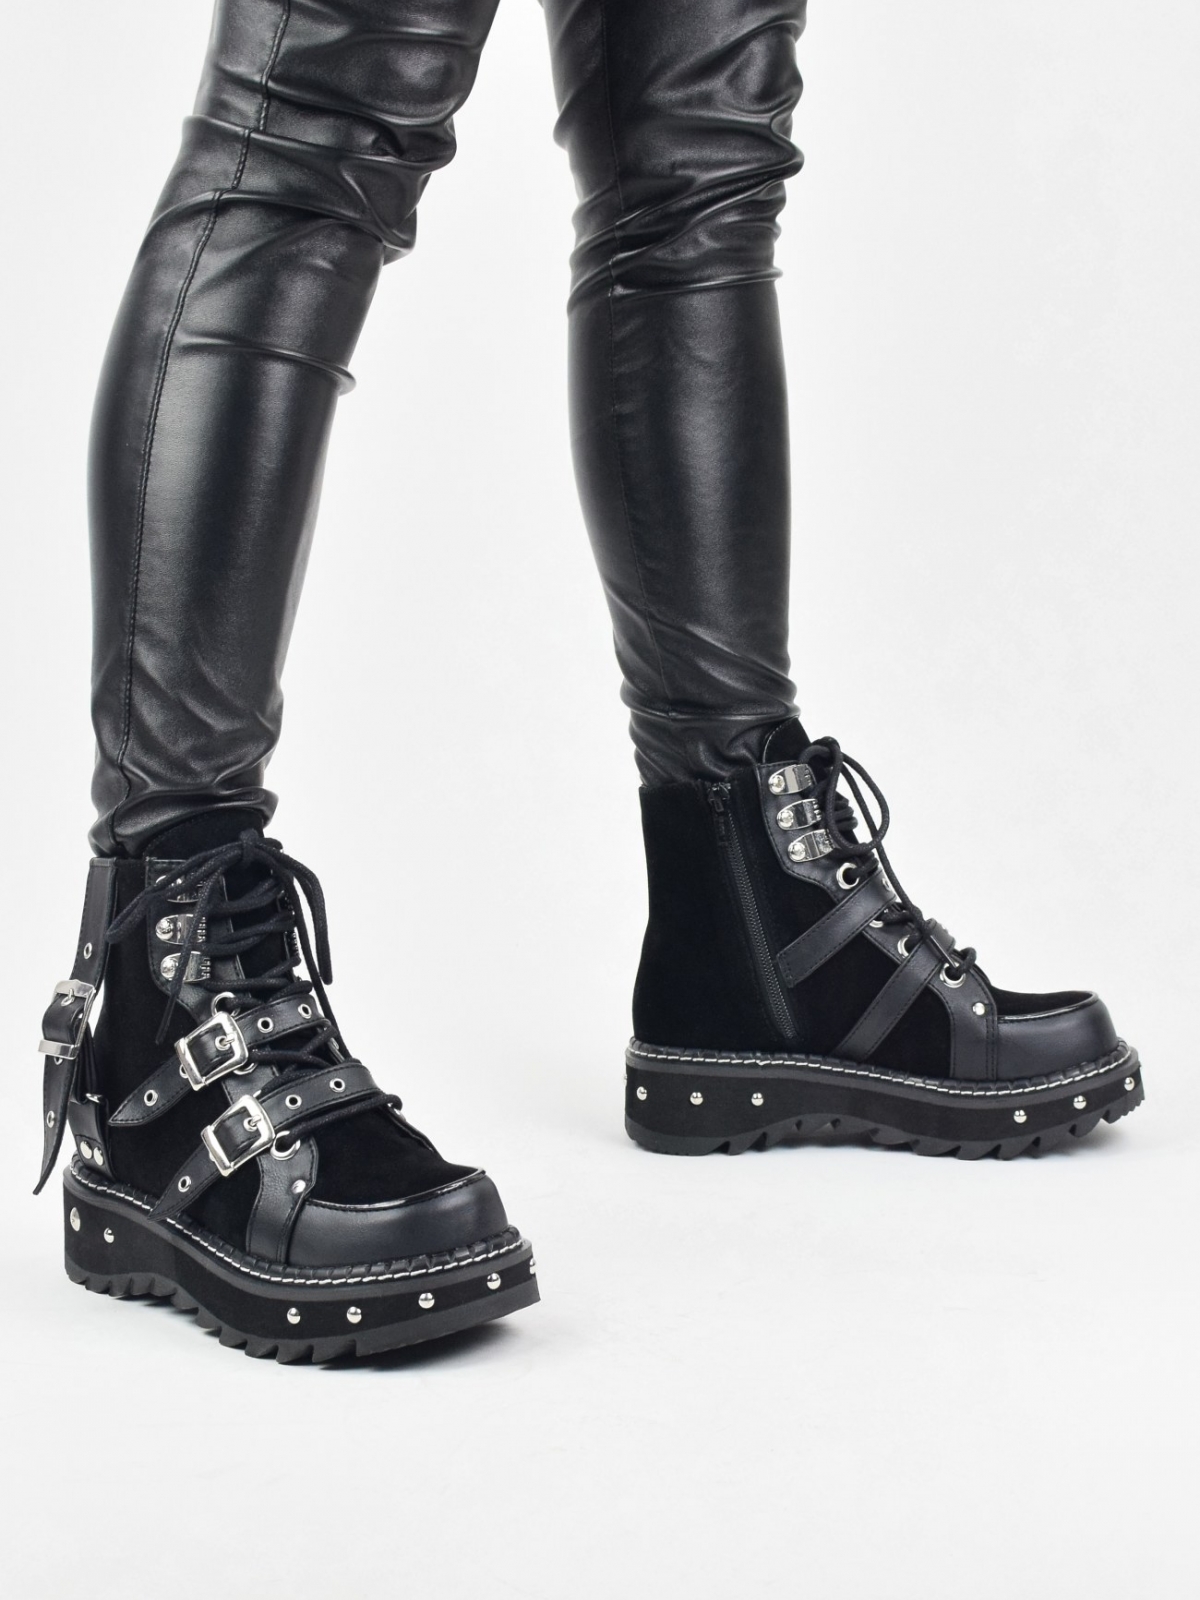 Lilith278 Ankle boots featuring buckle straps with side zip closure in black